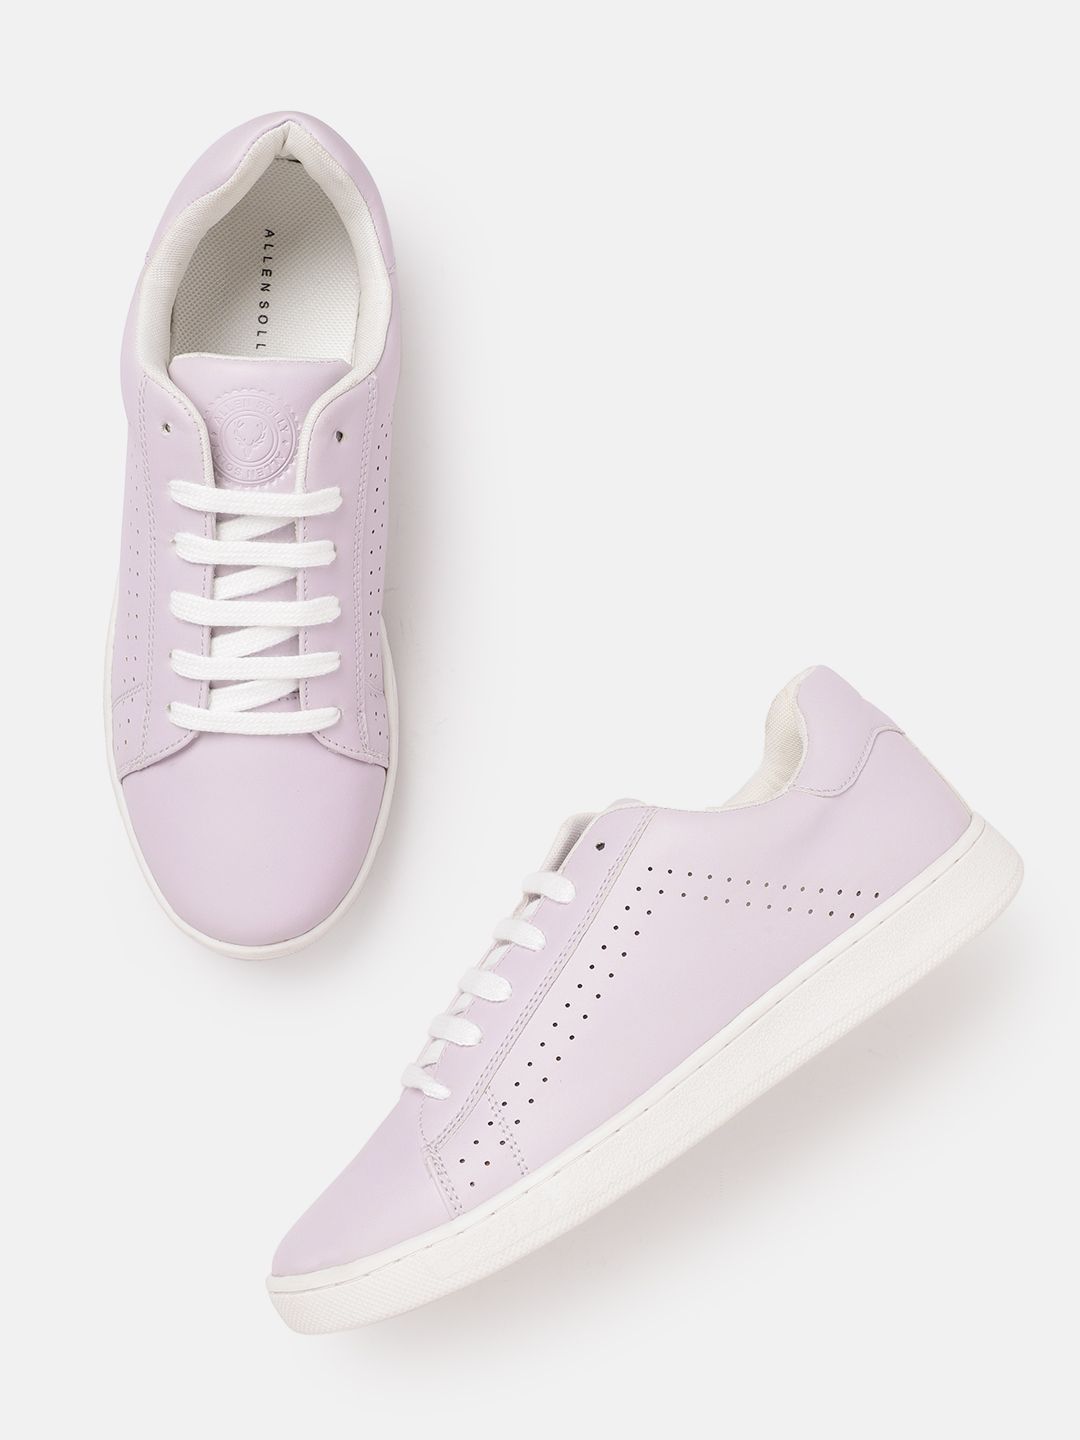 Allen Solly Women Sneakers with Perforated Detail Price in India